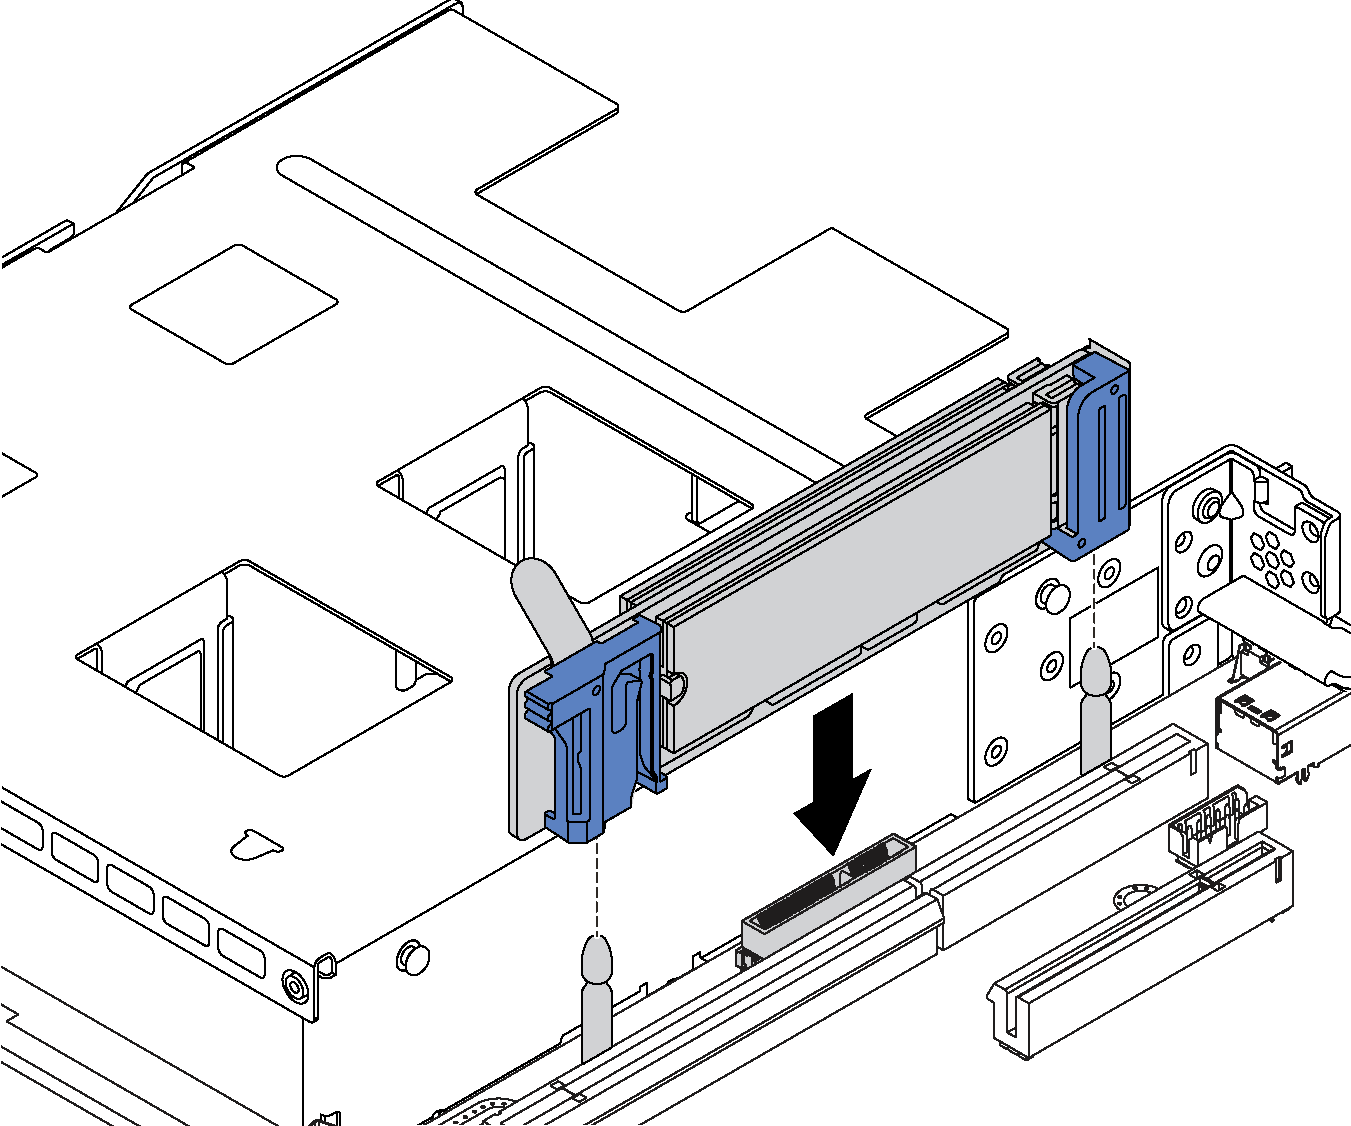 Install the M.2 backplane into the backplane slot.